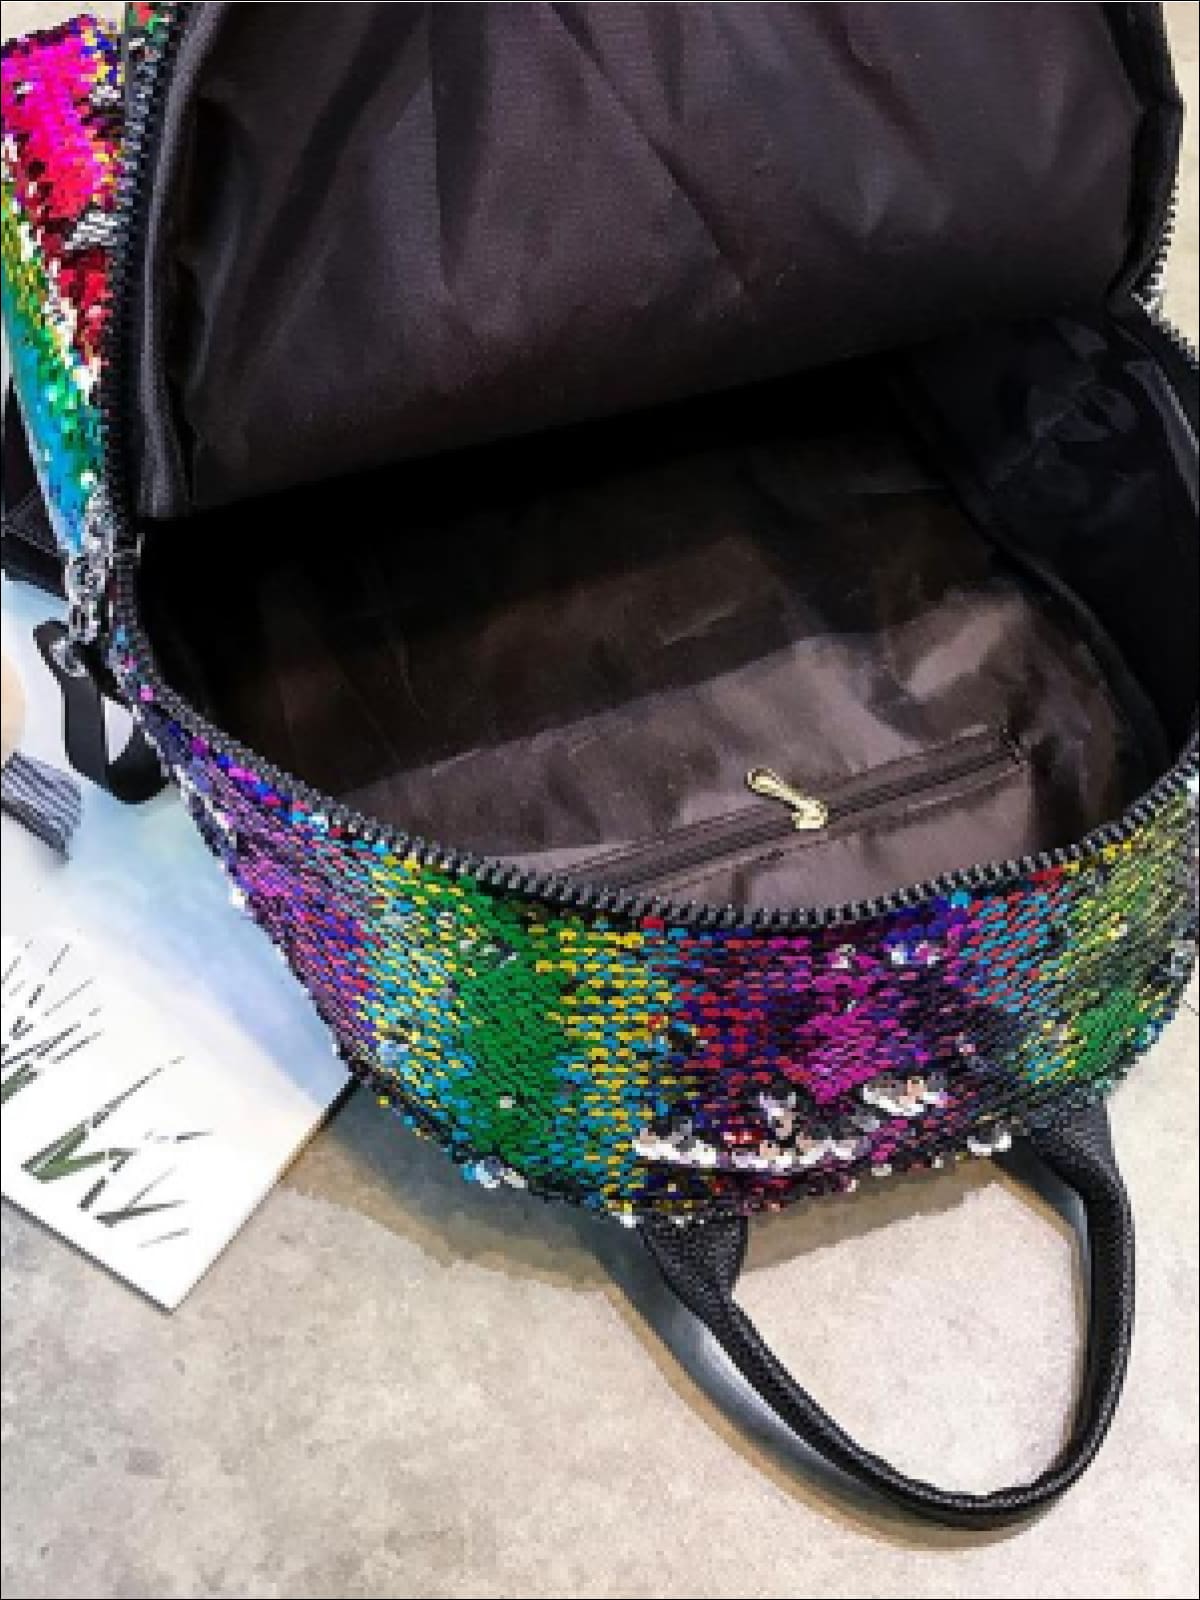 Back To School Bags | Multicolor Sequin Backpack | Mia Belle Girls